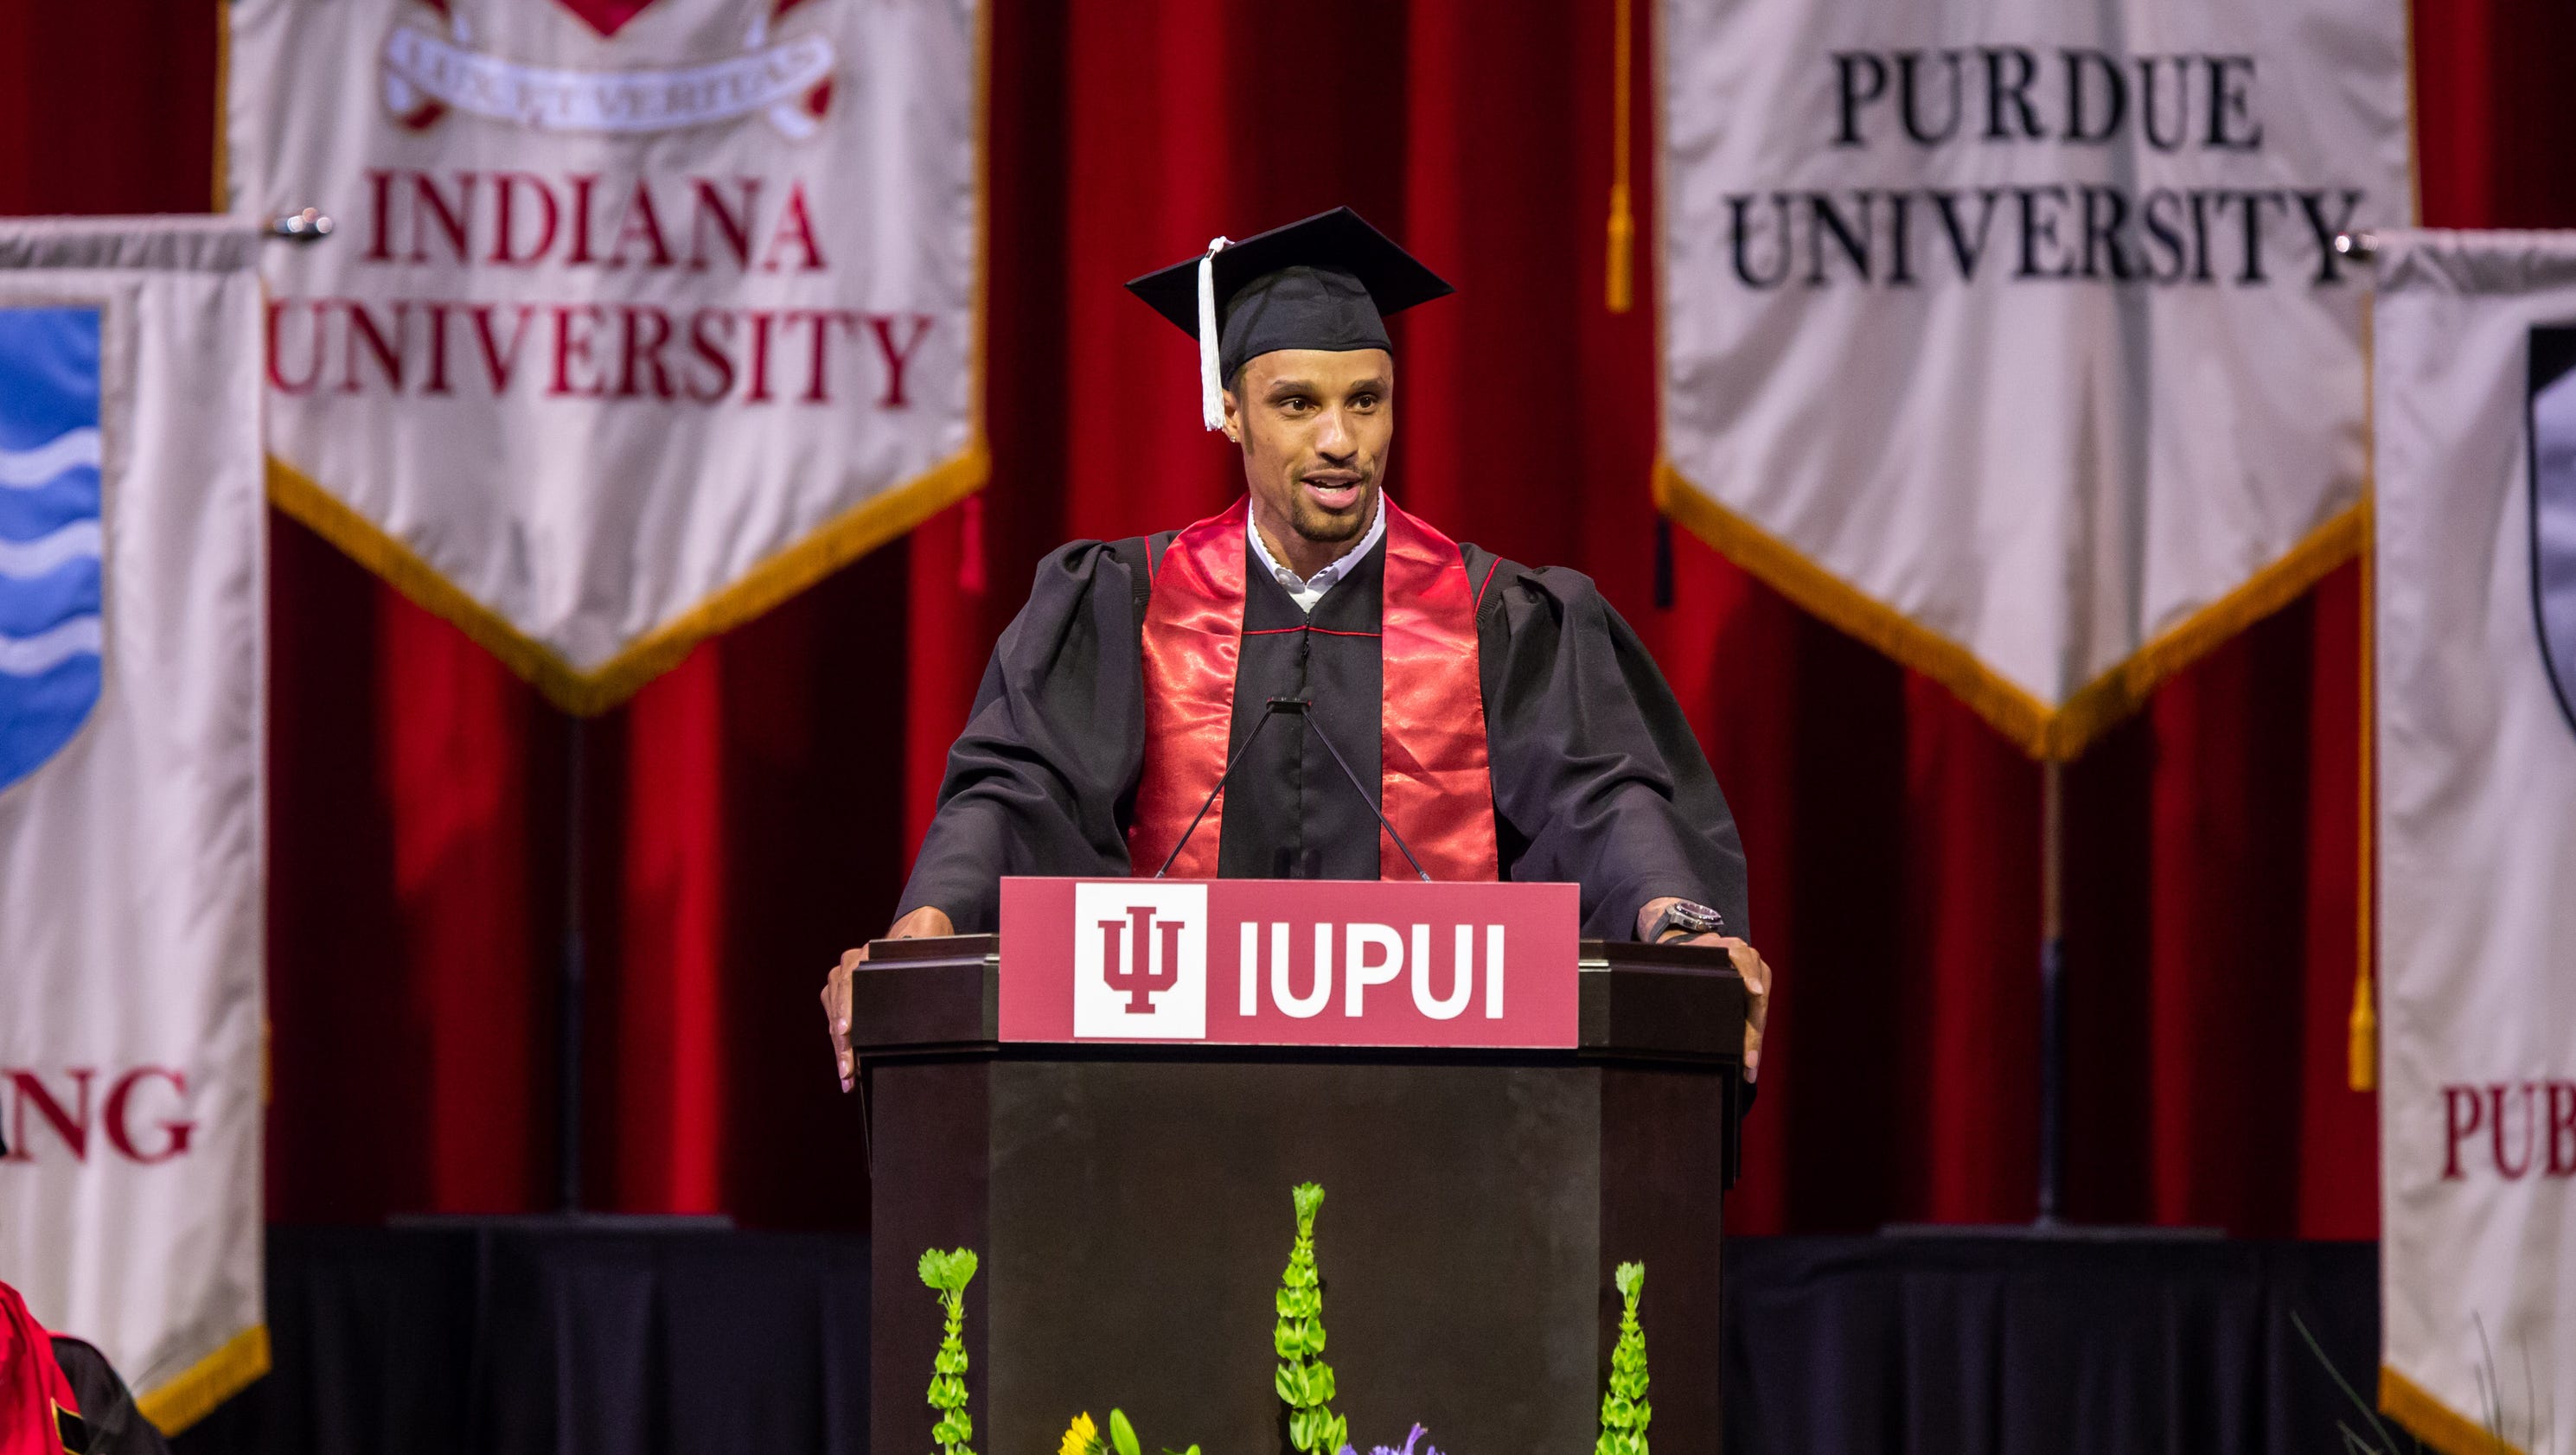 George Hill on IUPUI graduation: 'It’s not about how long it took me, it’s about finishing the job